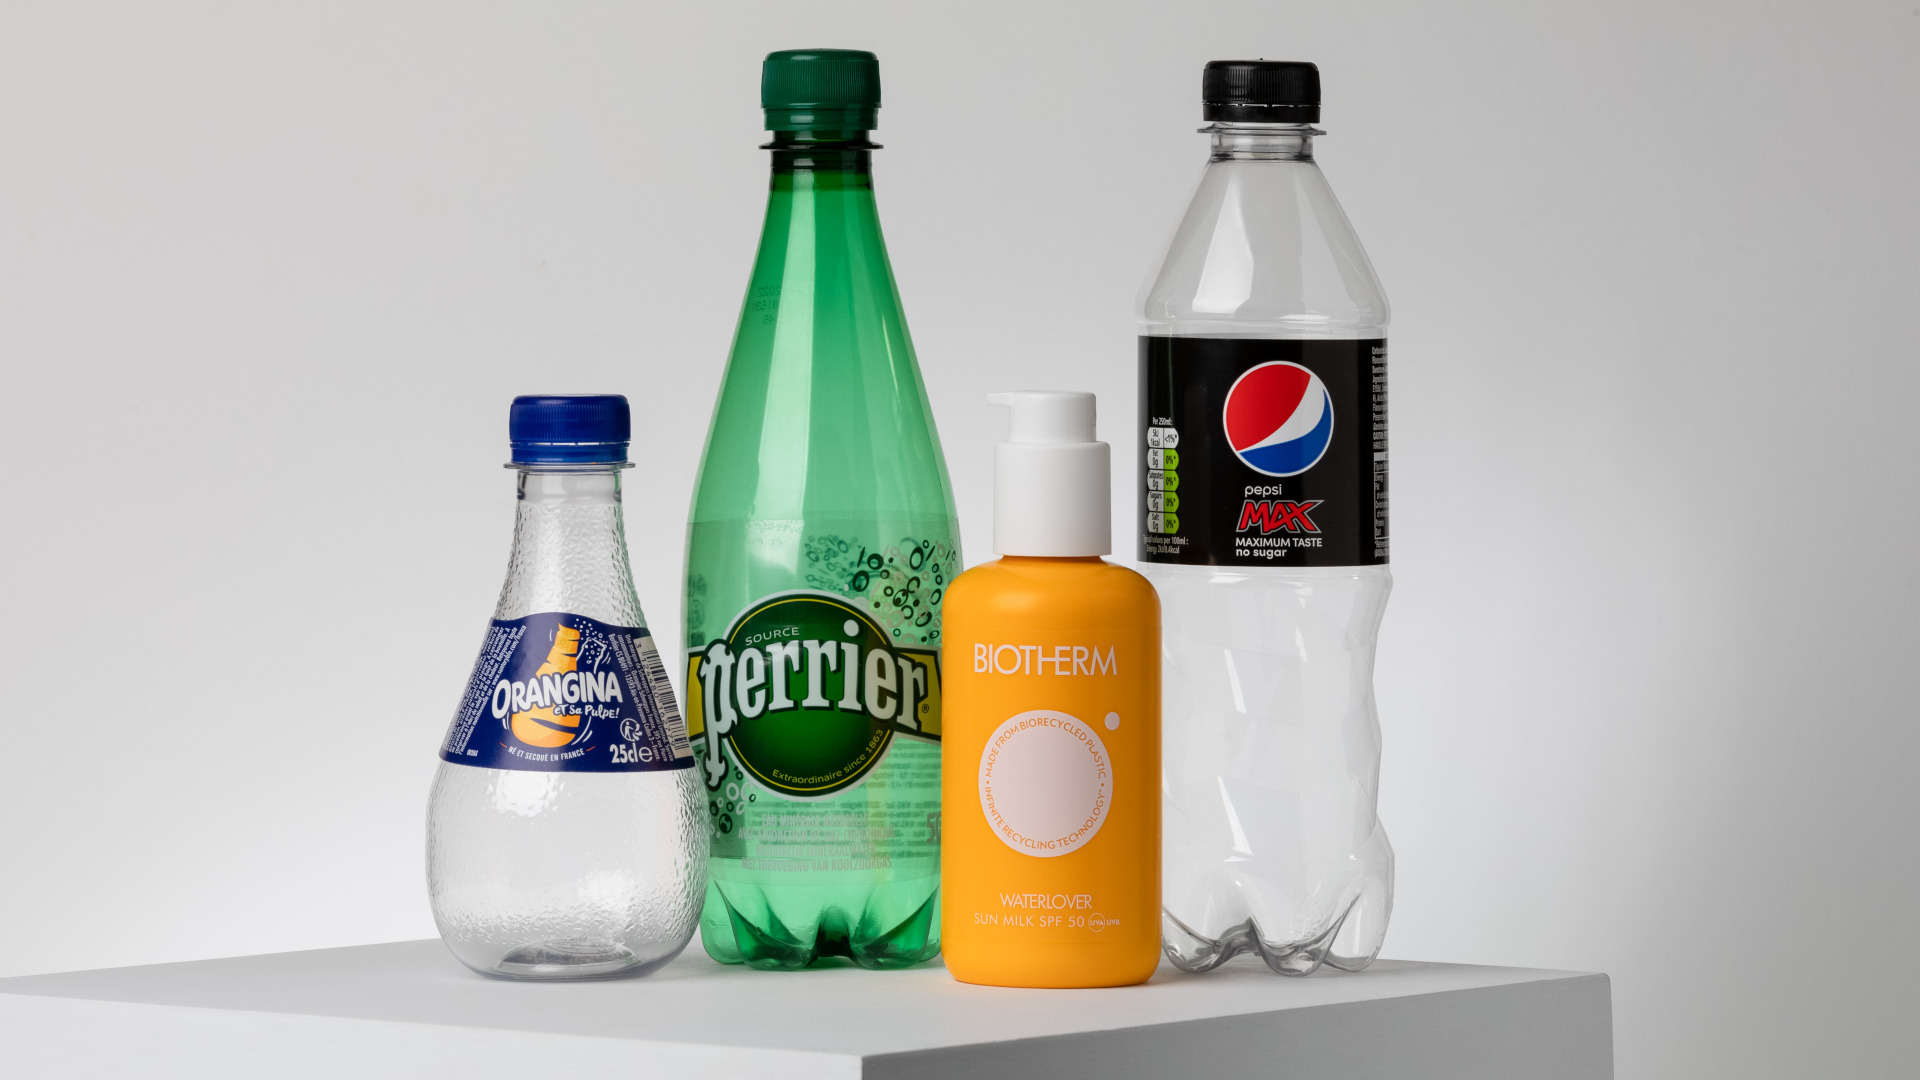 A new way of recycling has grabbed the attention of some of the world’s largest consumer goods companies, including L’Oréal, Nestlé, and PepsiCo, who collaborated with startup company Carbios to produce proof-of-concept bottles.